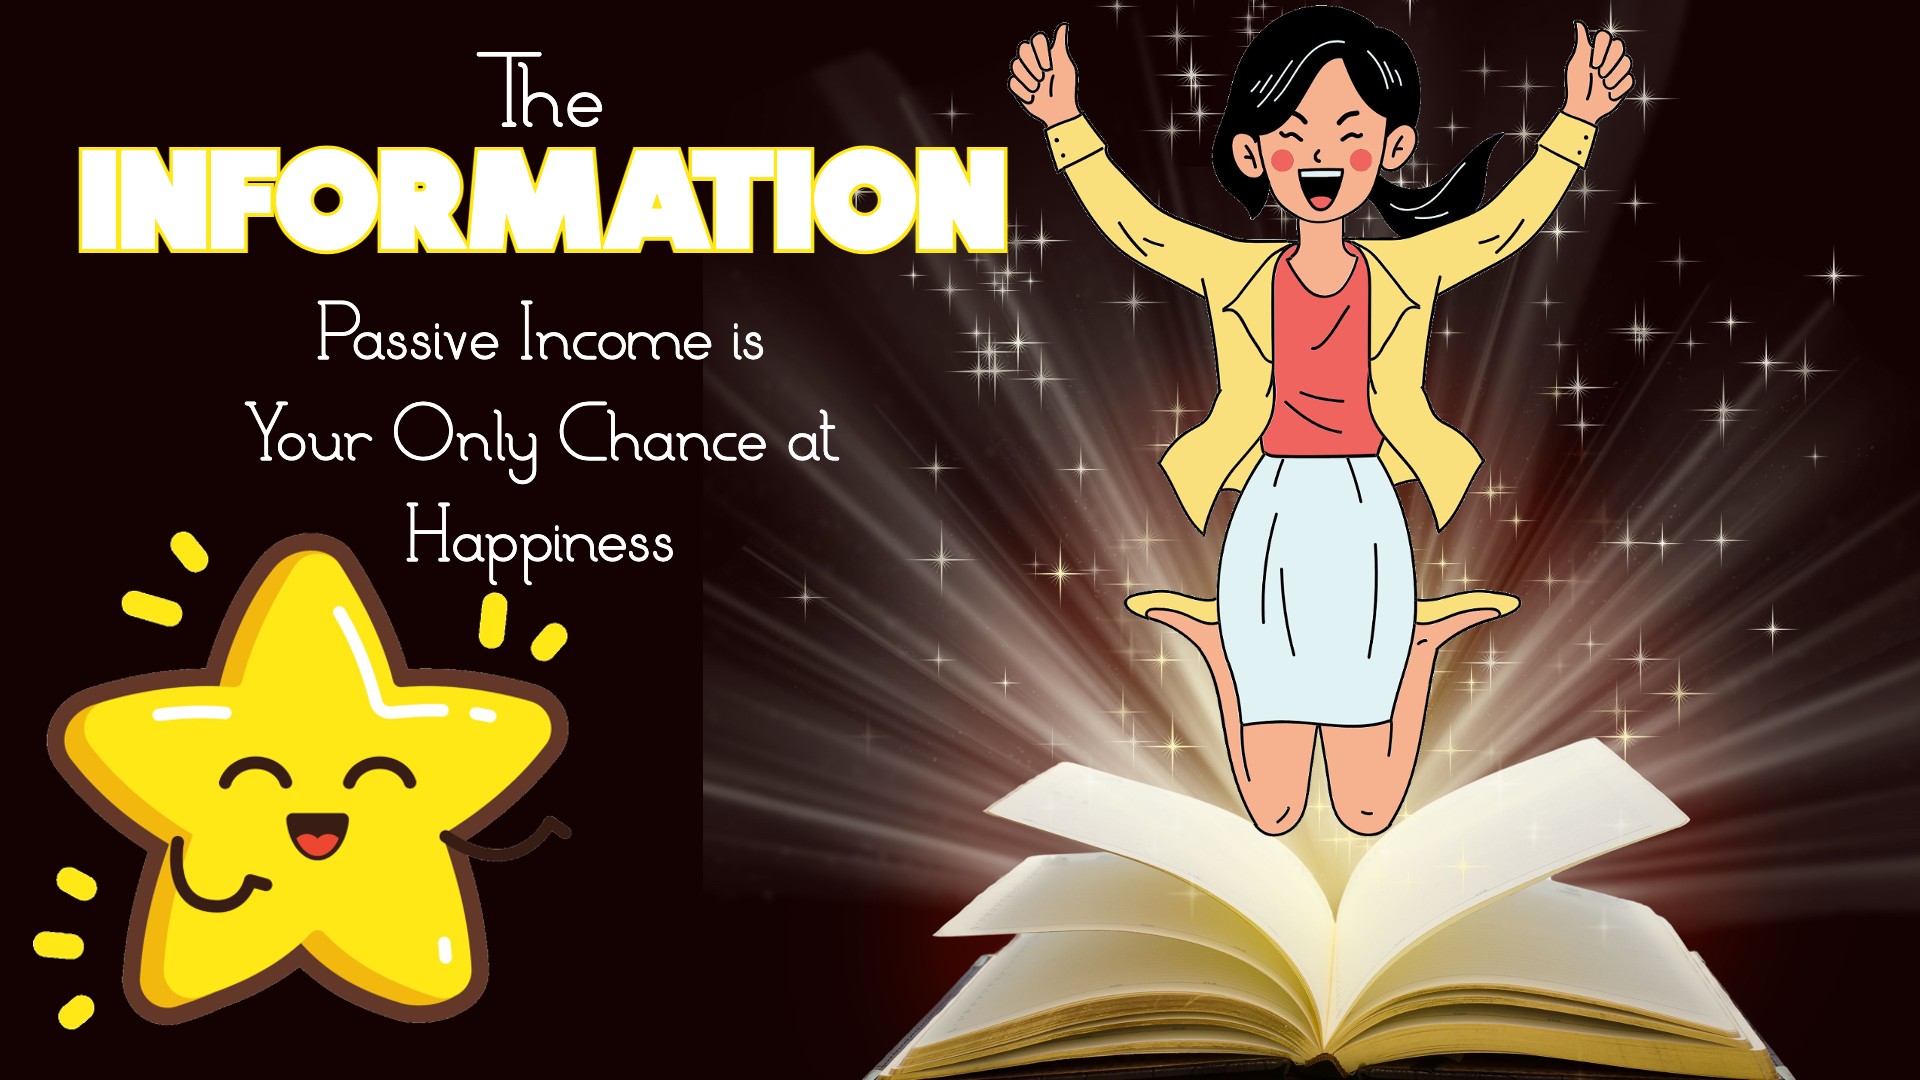 The Information: Passive Income is Your Only Chance at Happiness